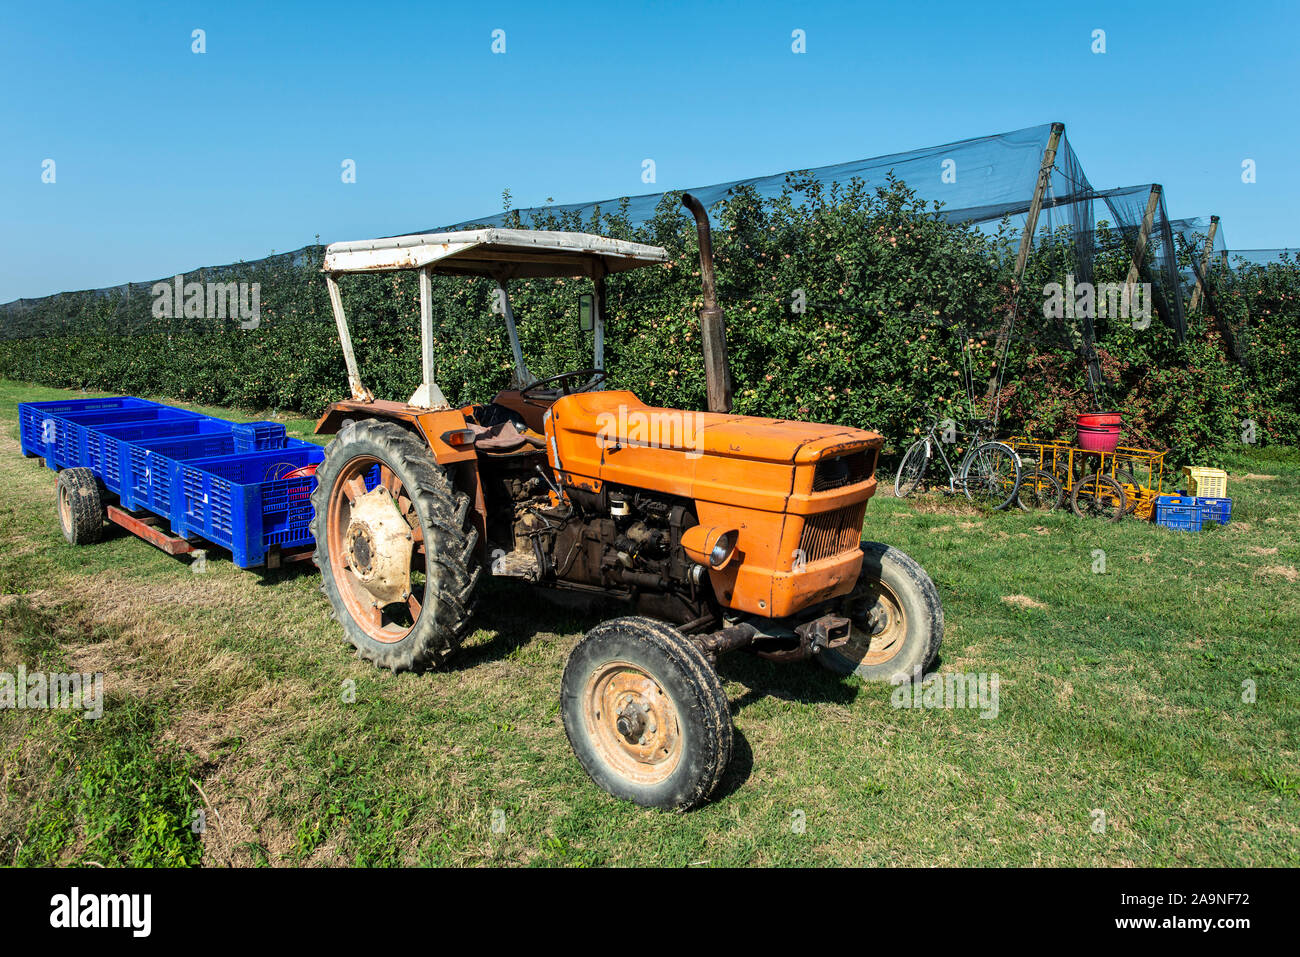 Tractor in apple farm. Tractor and trailer with crates for apples. Harvest apples in big orchard. Sunny day. Industrially growing apple trees. Stock Photo